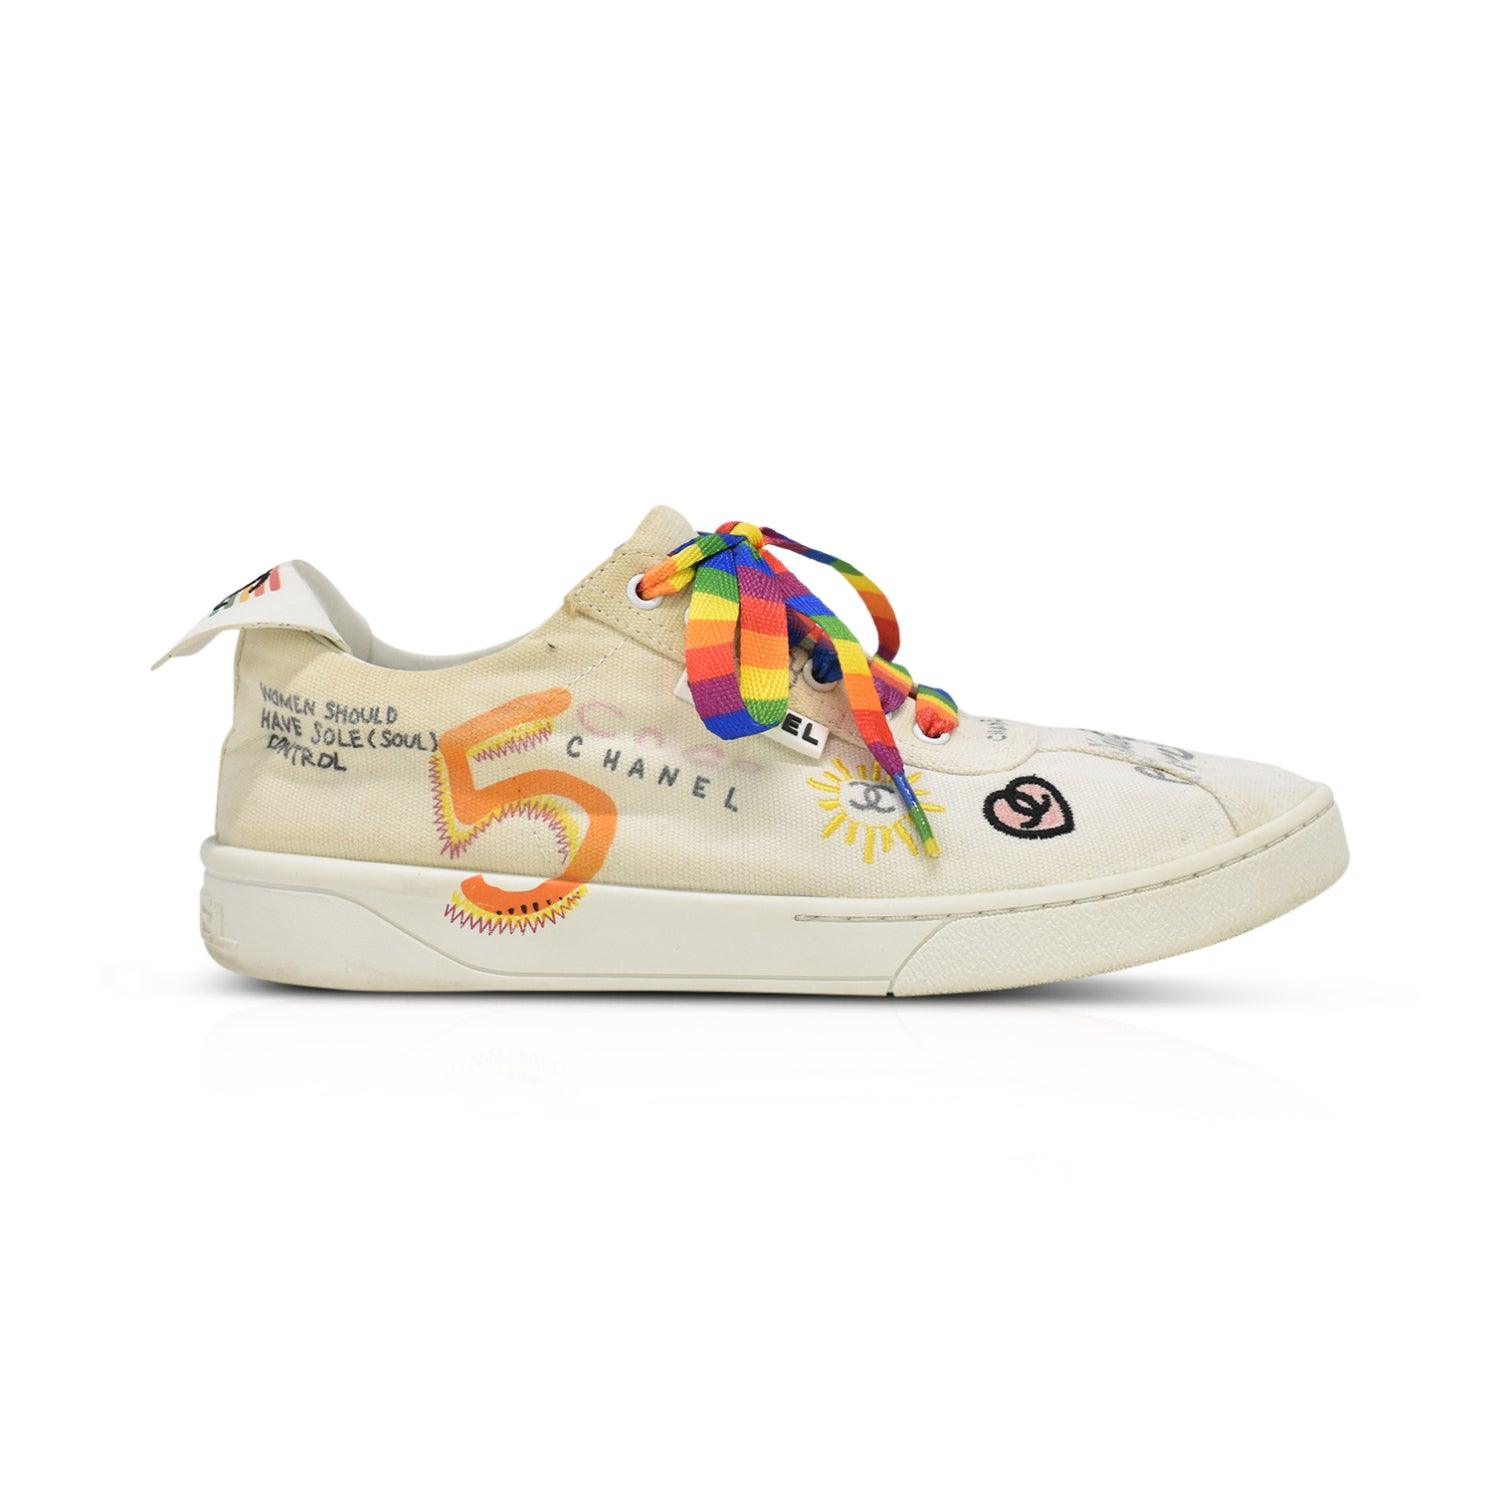 Chanel x Pharrell Low-Top Sneakers - Women's 37 – Fashionably Yours